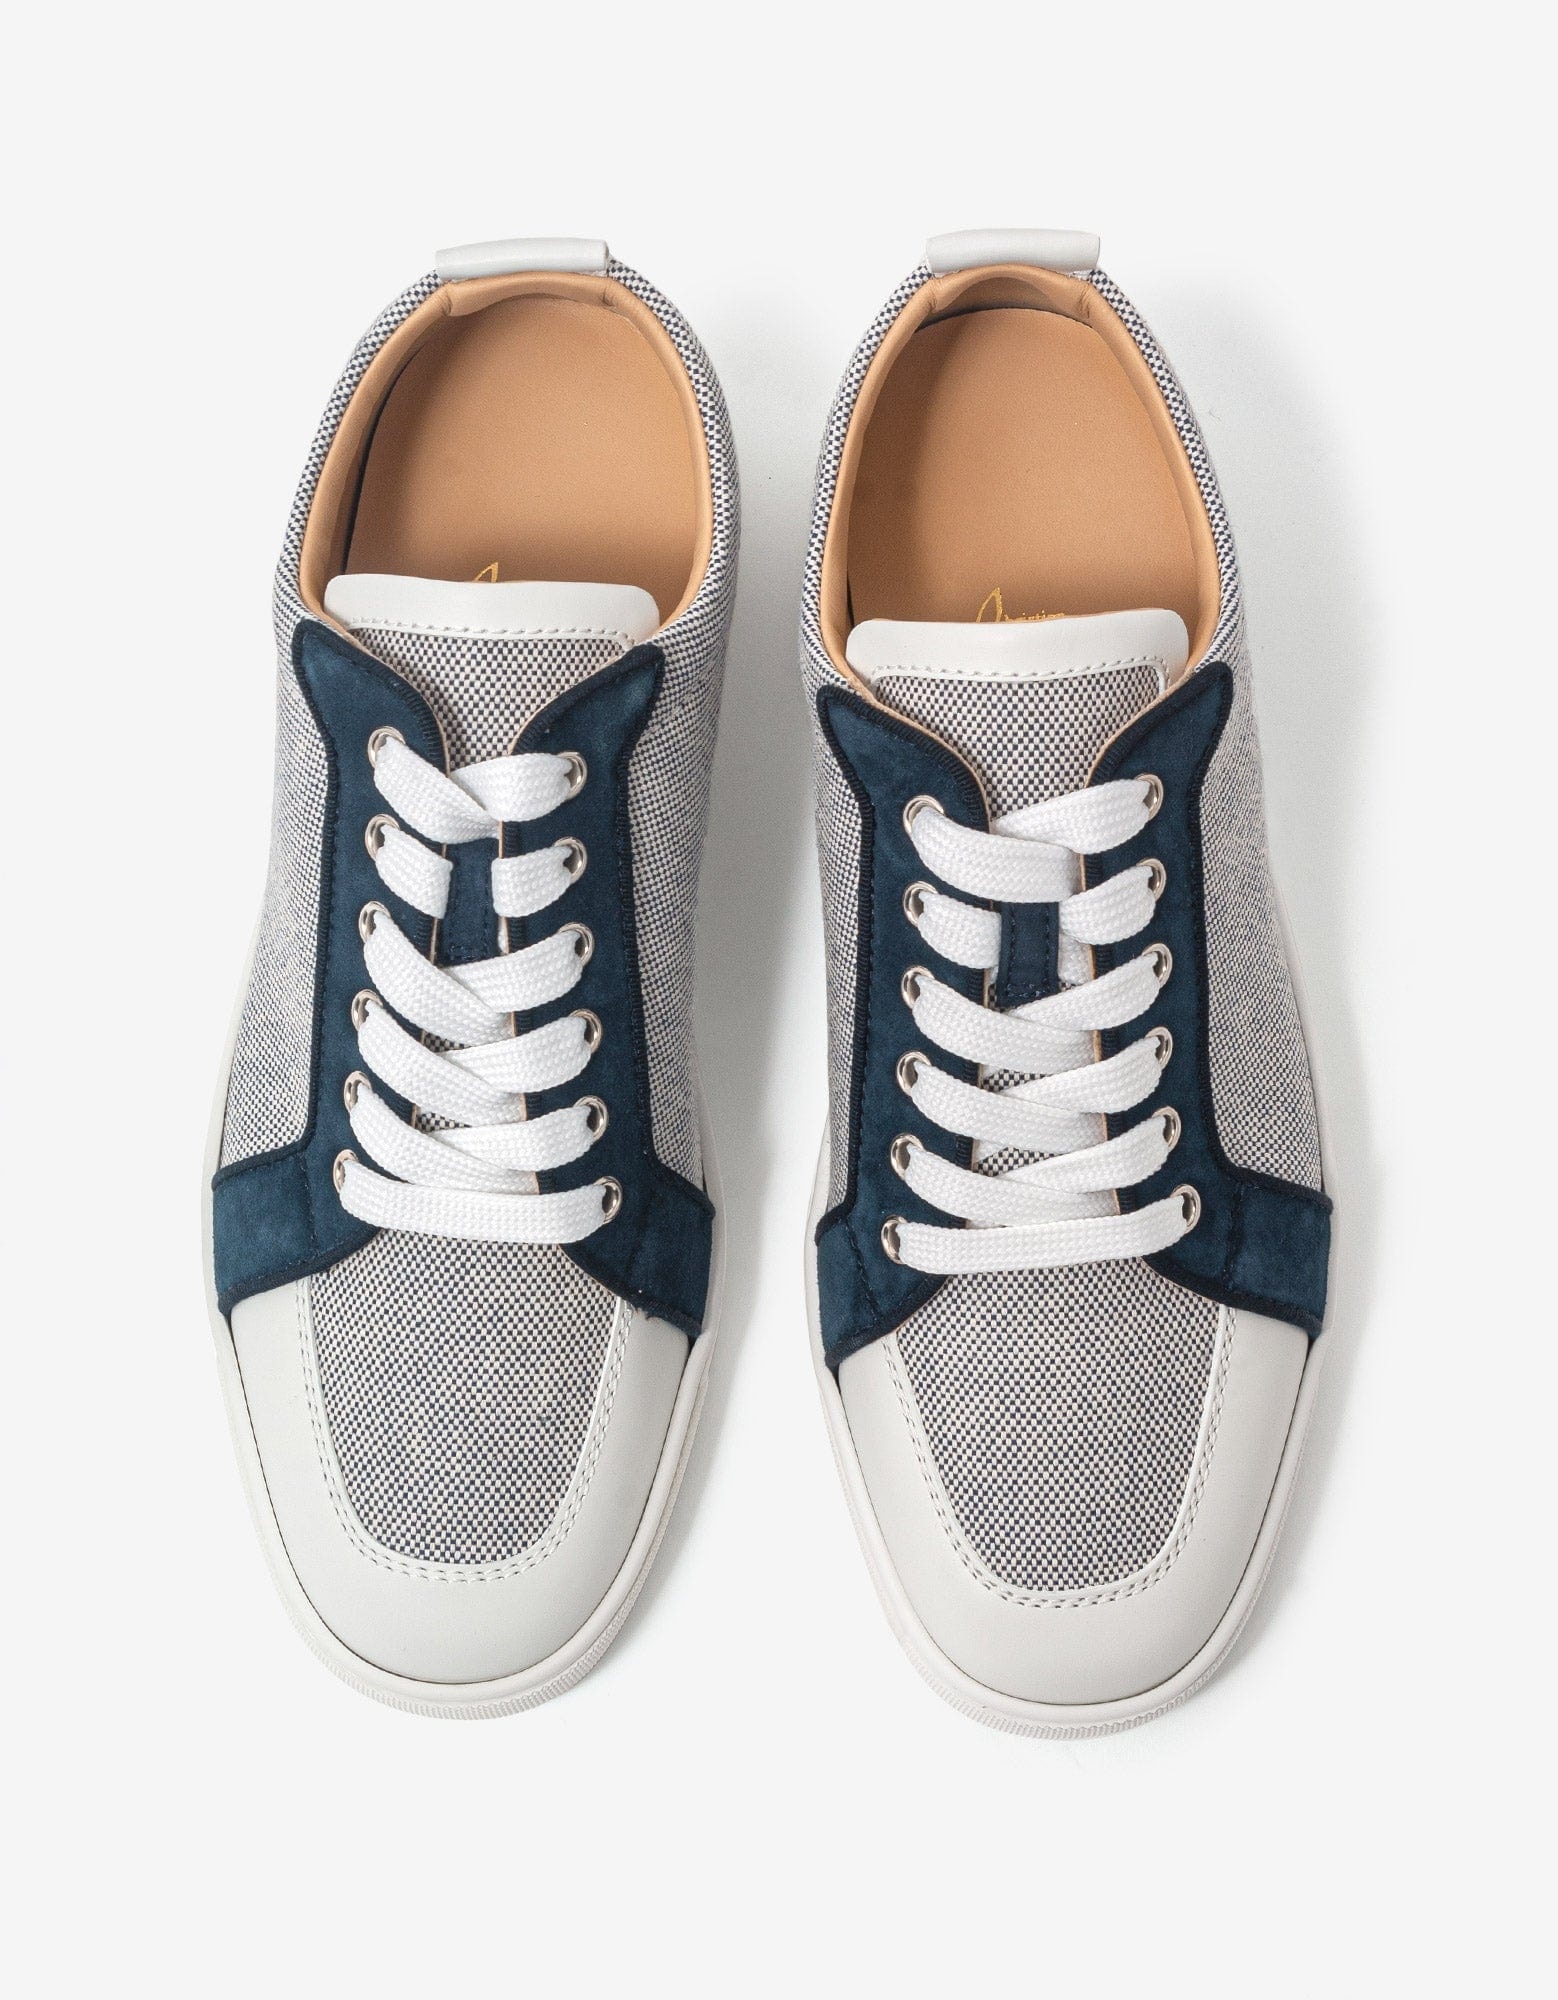 Rantulow Flat Navy Blue & White Trainers - - 4